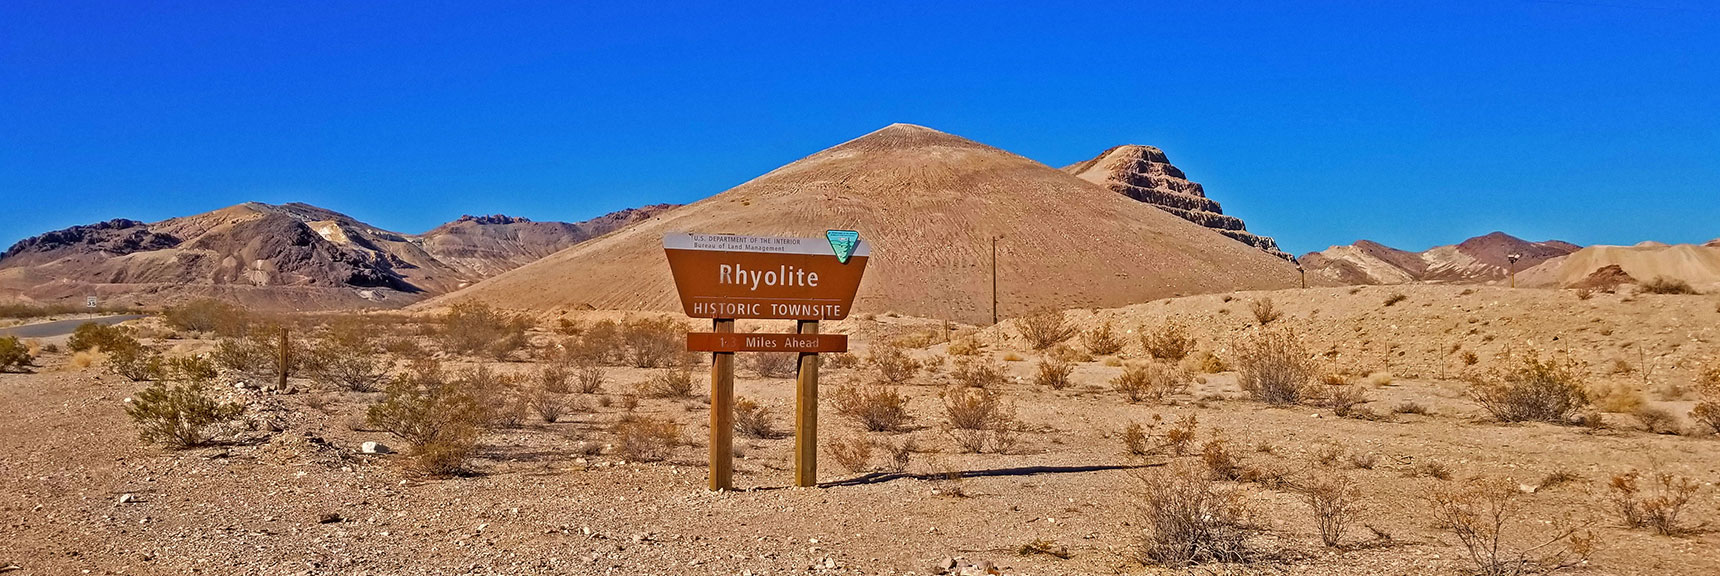 Rhyolite Entrance Sign Off Hwy 394 - Short Paved Road to Rhyolite | Rhyolite Ghost Town | Death Valley Area, Nevada